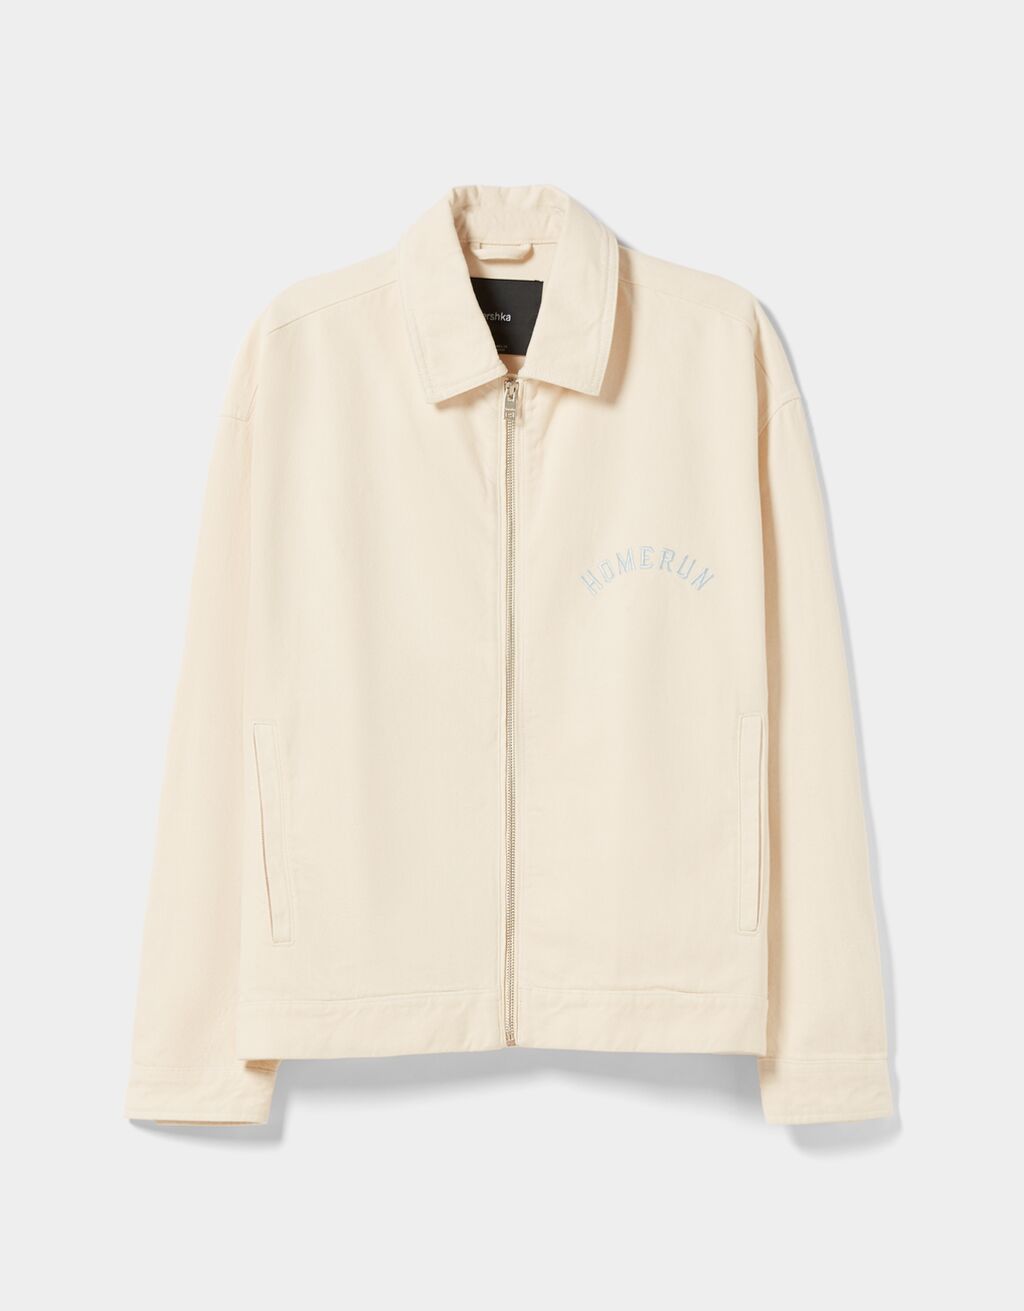 Embroidered cotton jacket